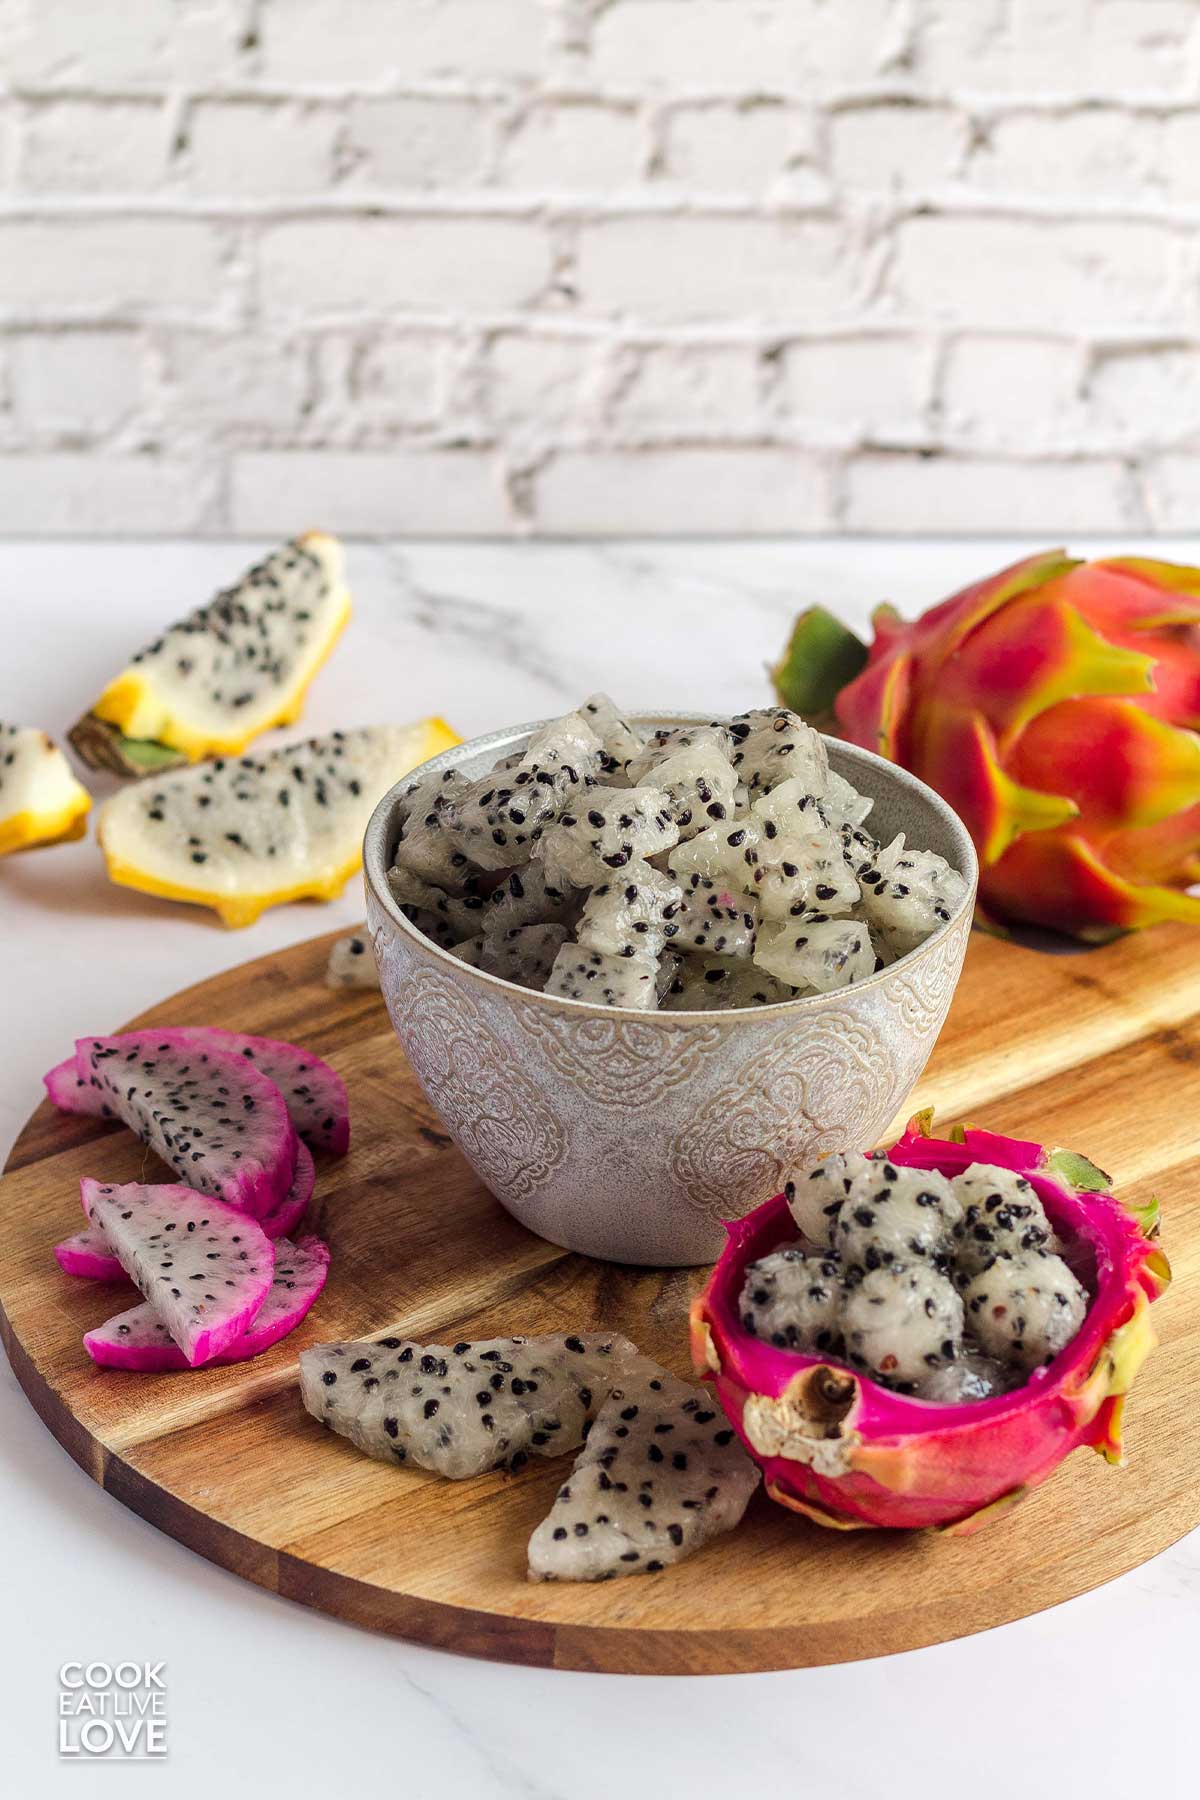 Dragon fruit cut in different shapes, slices, cubes and balls in a bowl and on the table.